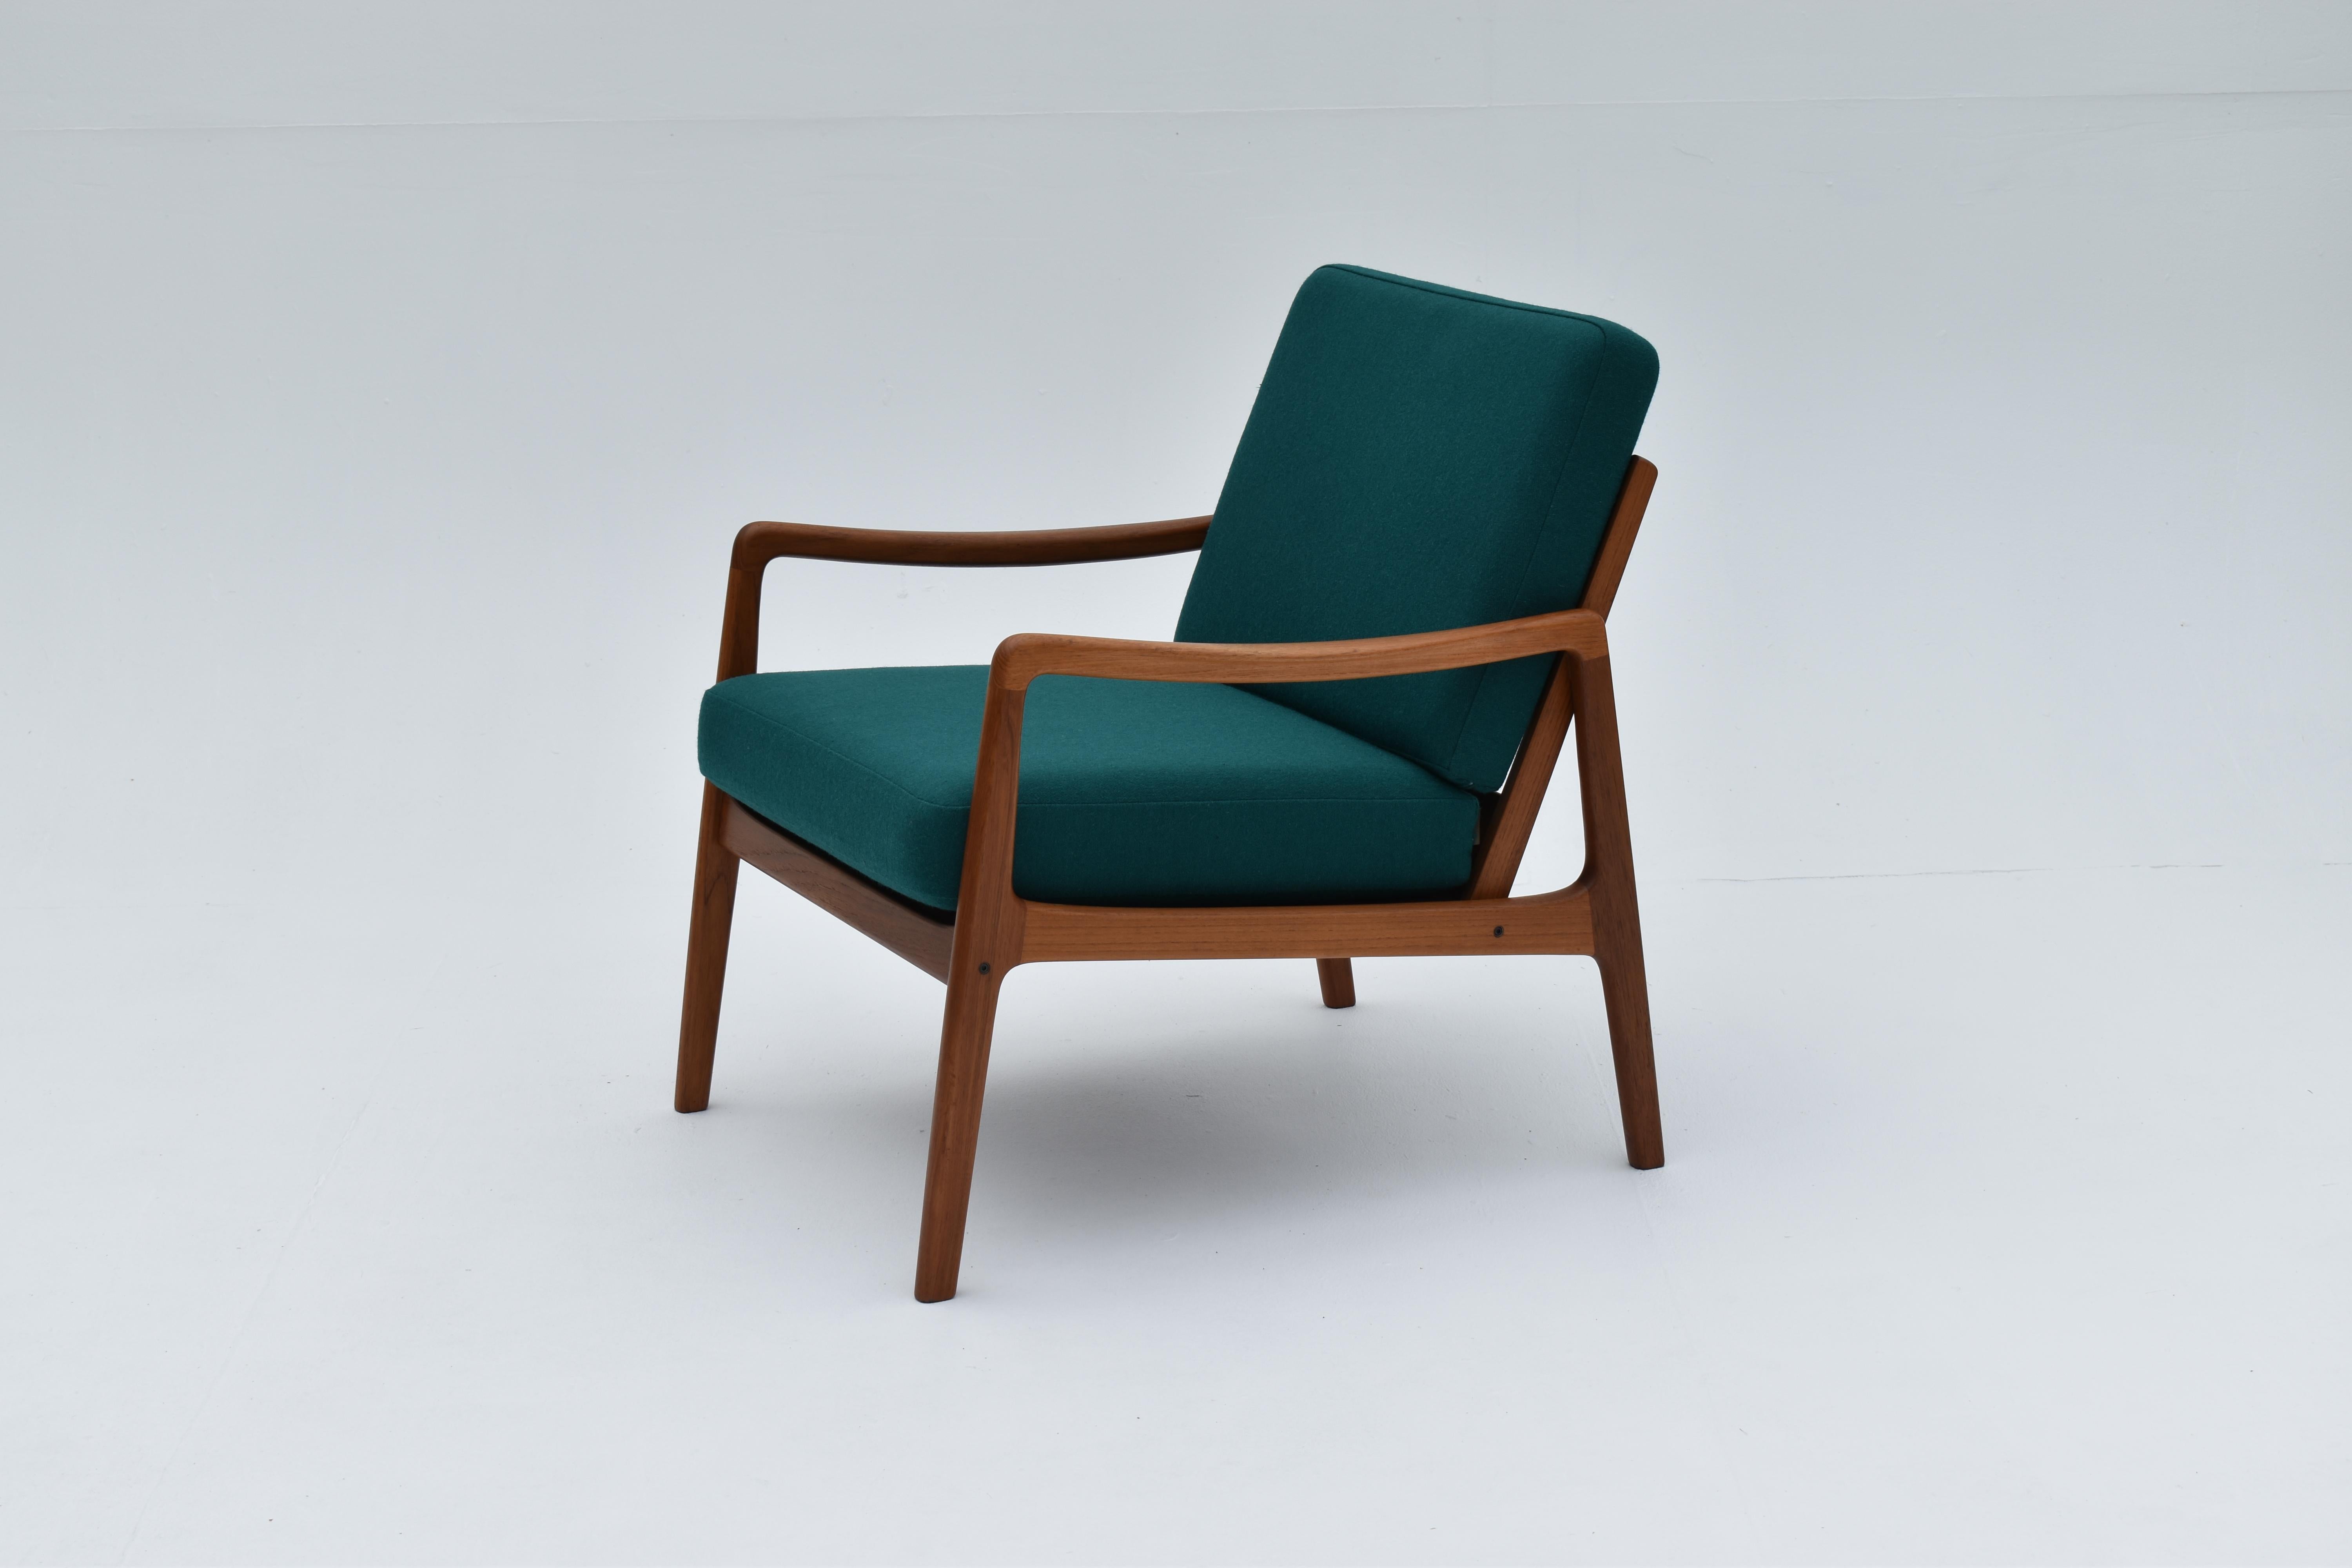 A very elegant and hard to find model designed by Professor Ole Wanscher in 1961-62.

Bringing together classical and modernist design motifs to such a beautifully coherent result this chair is a study in minimalist sophistication and typical of